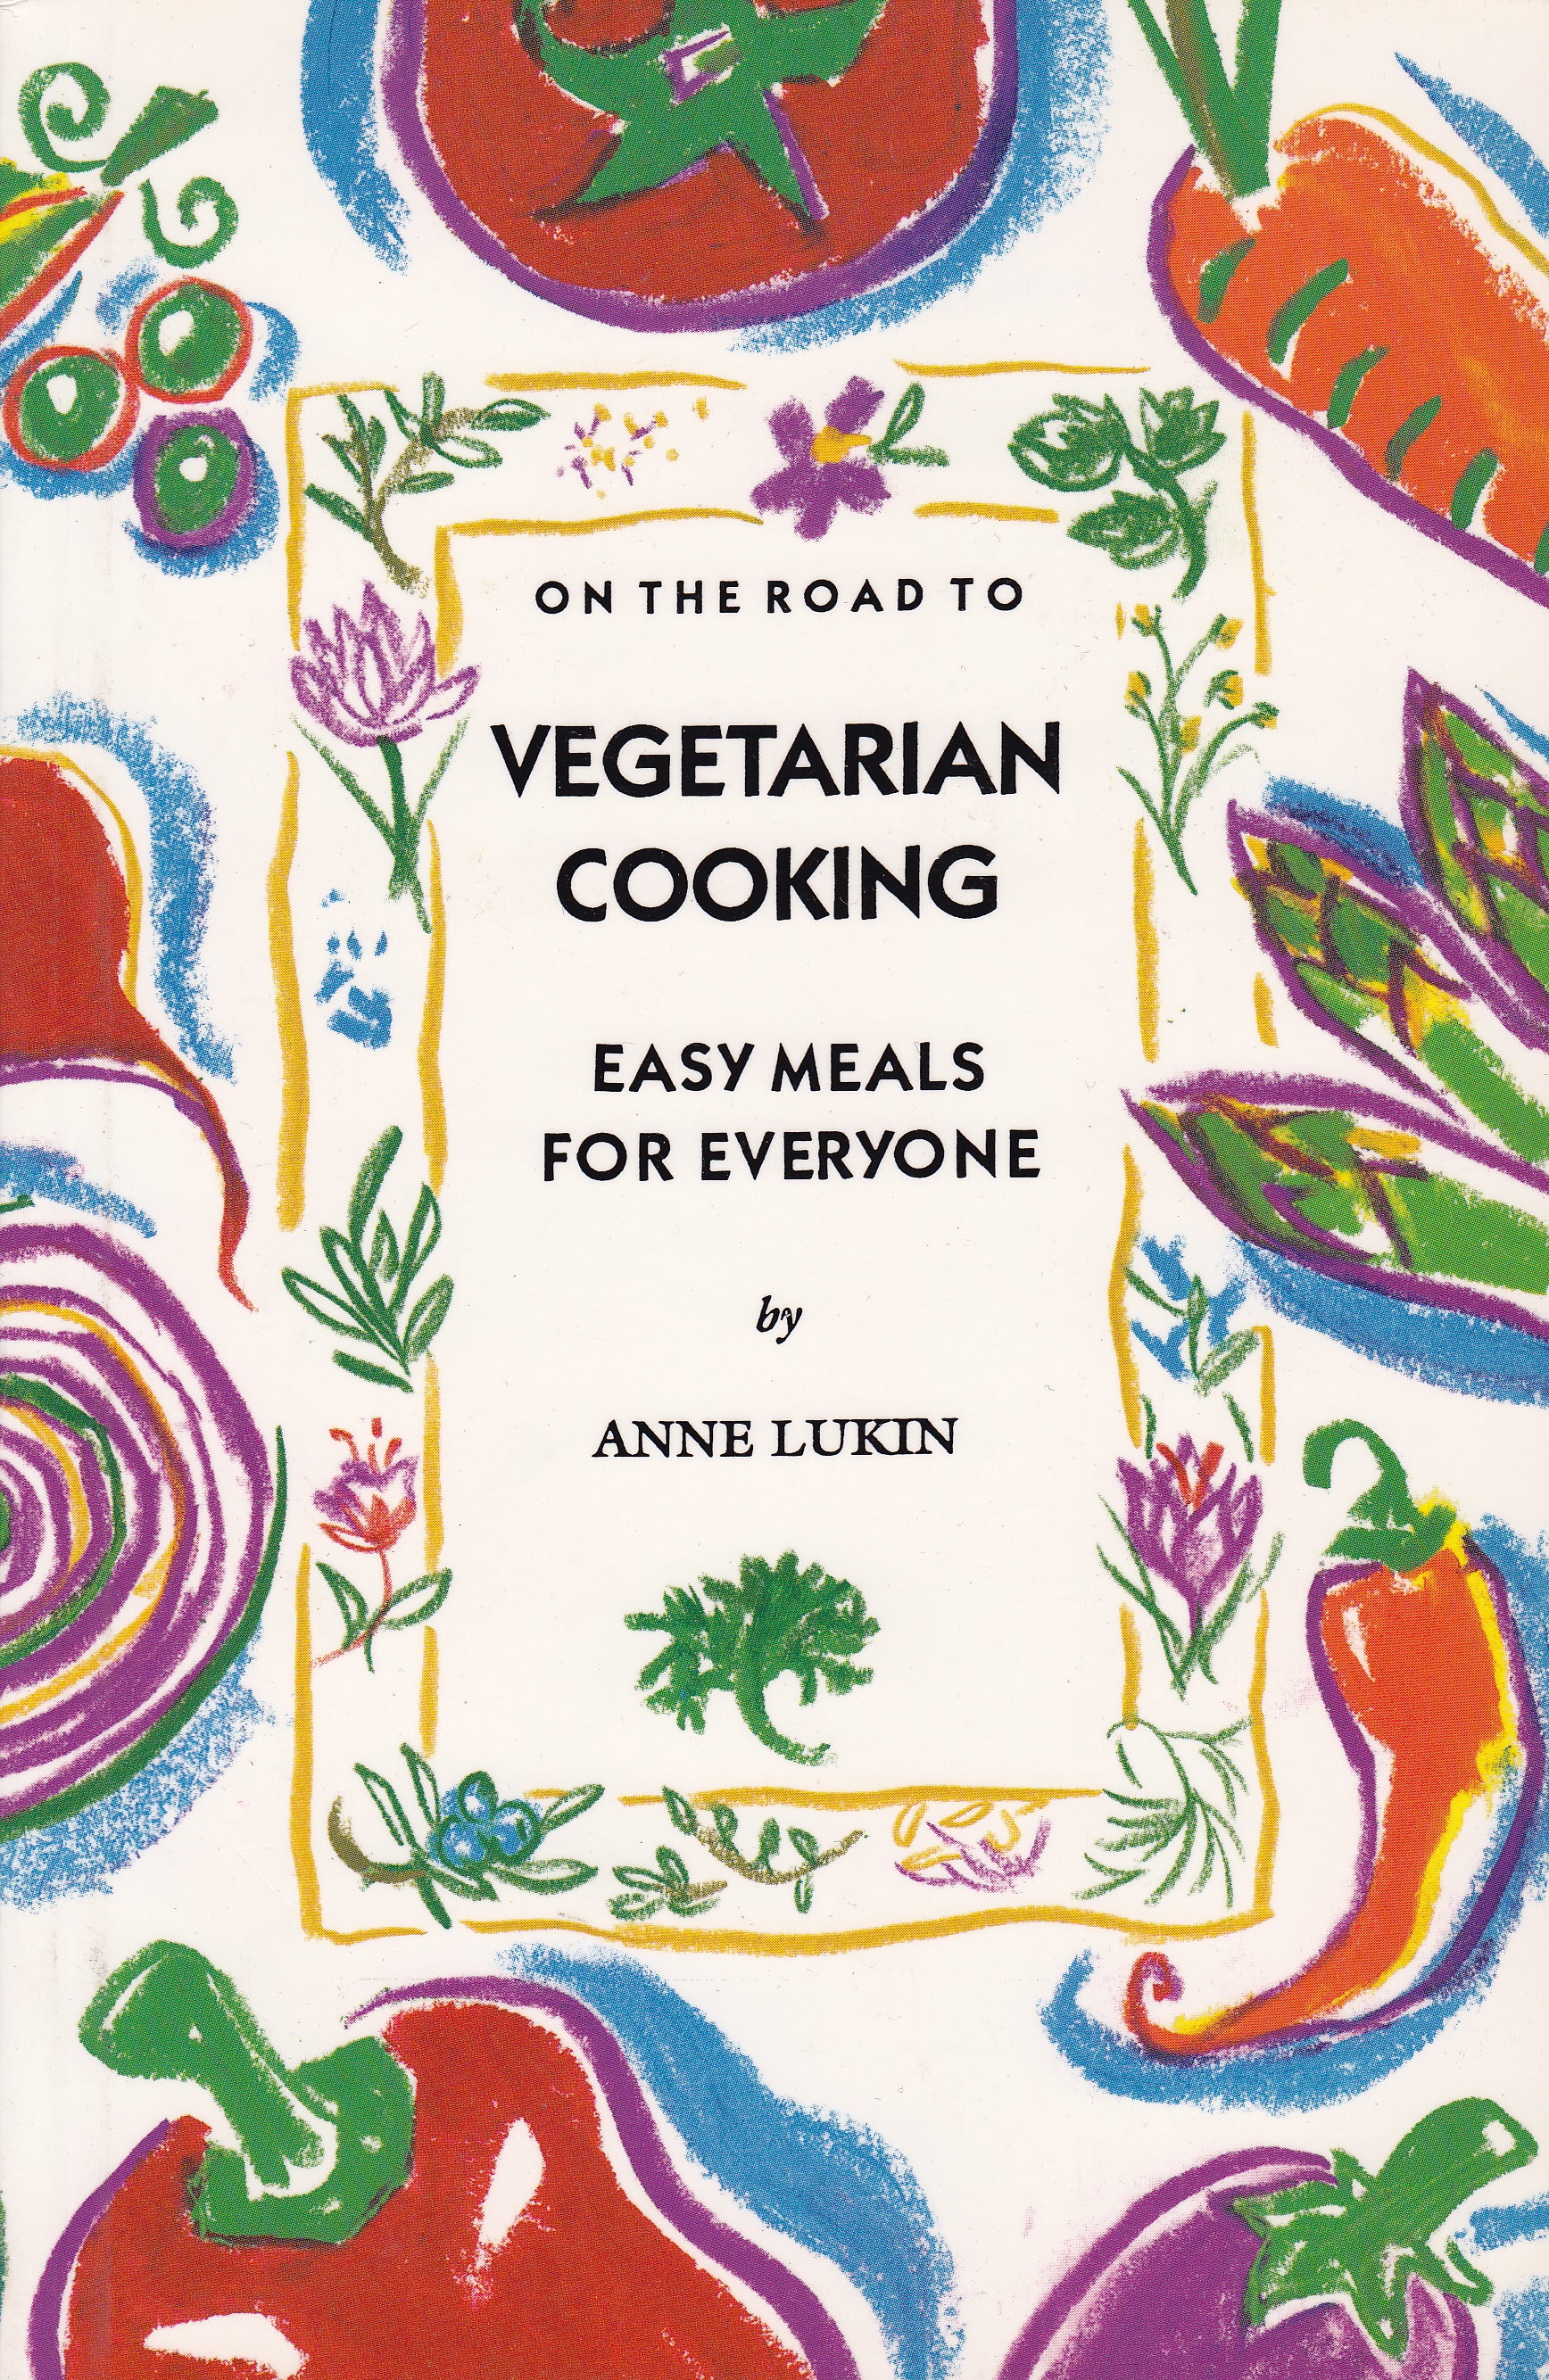 On the Road to Vegetarian Cooking-ebook